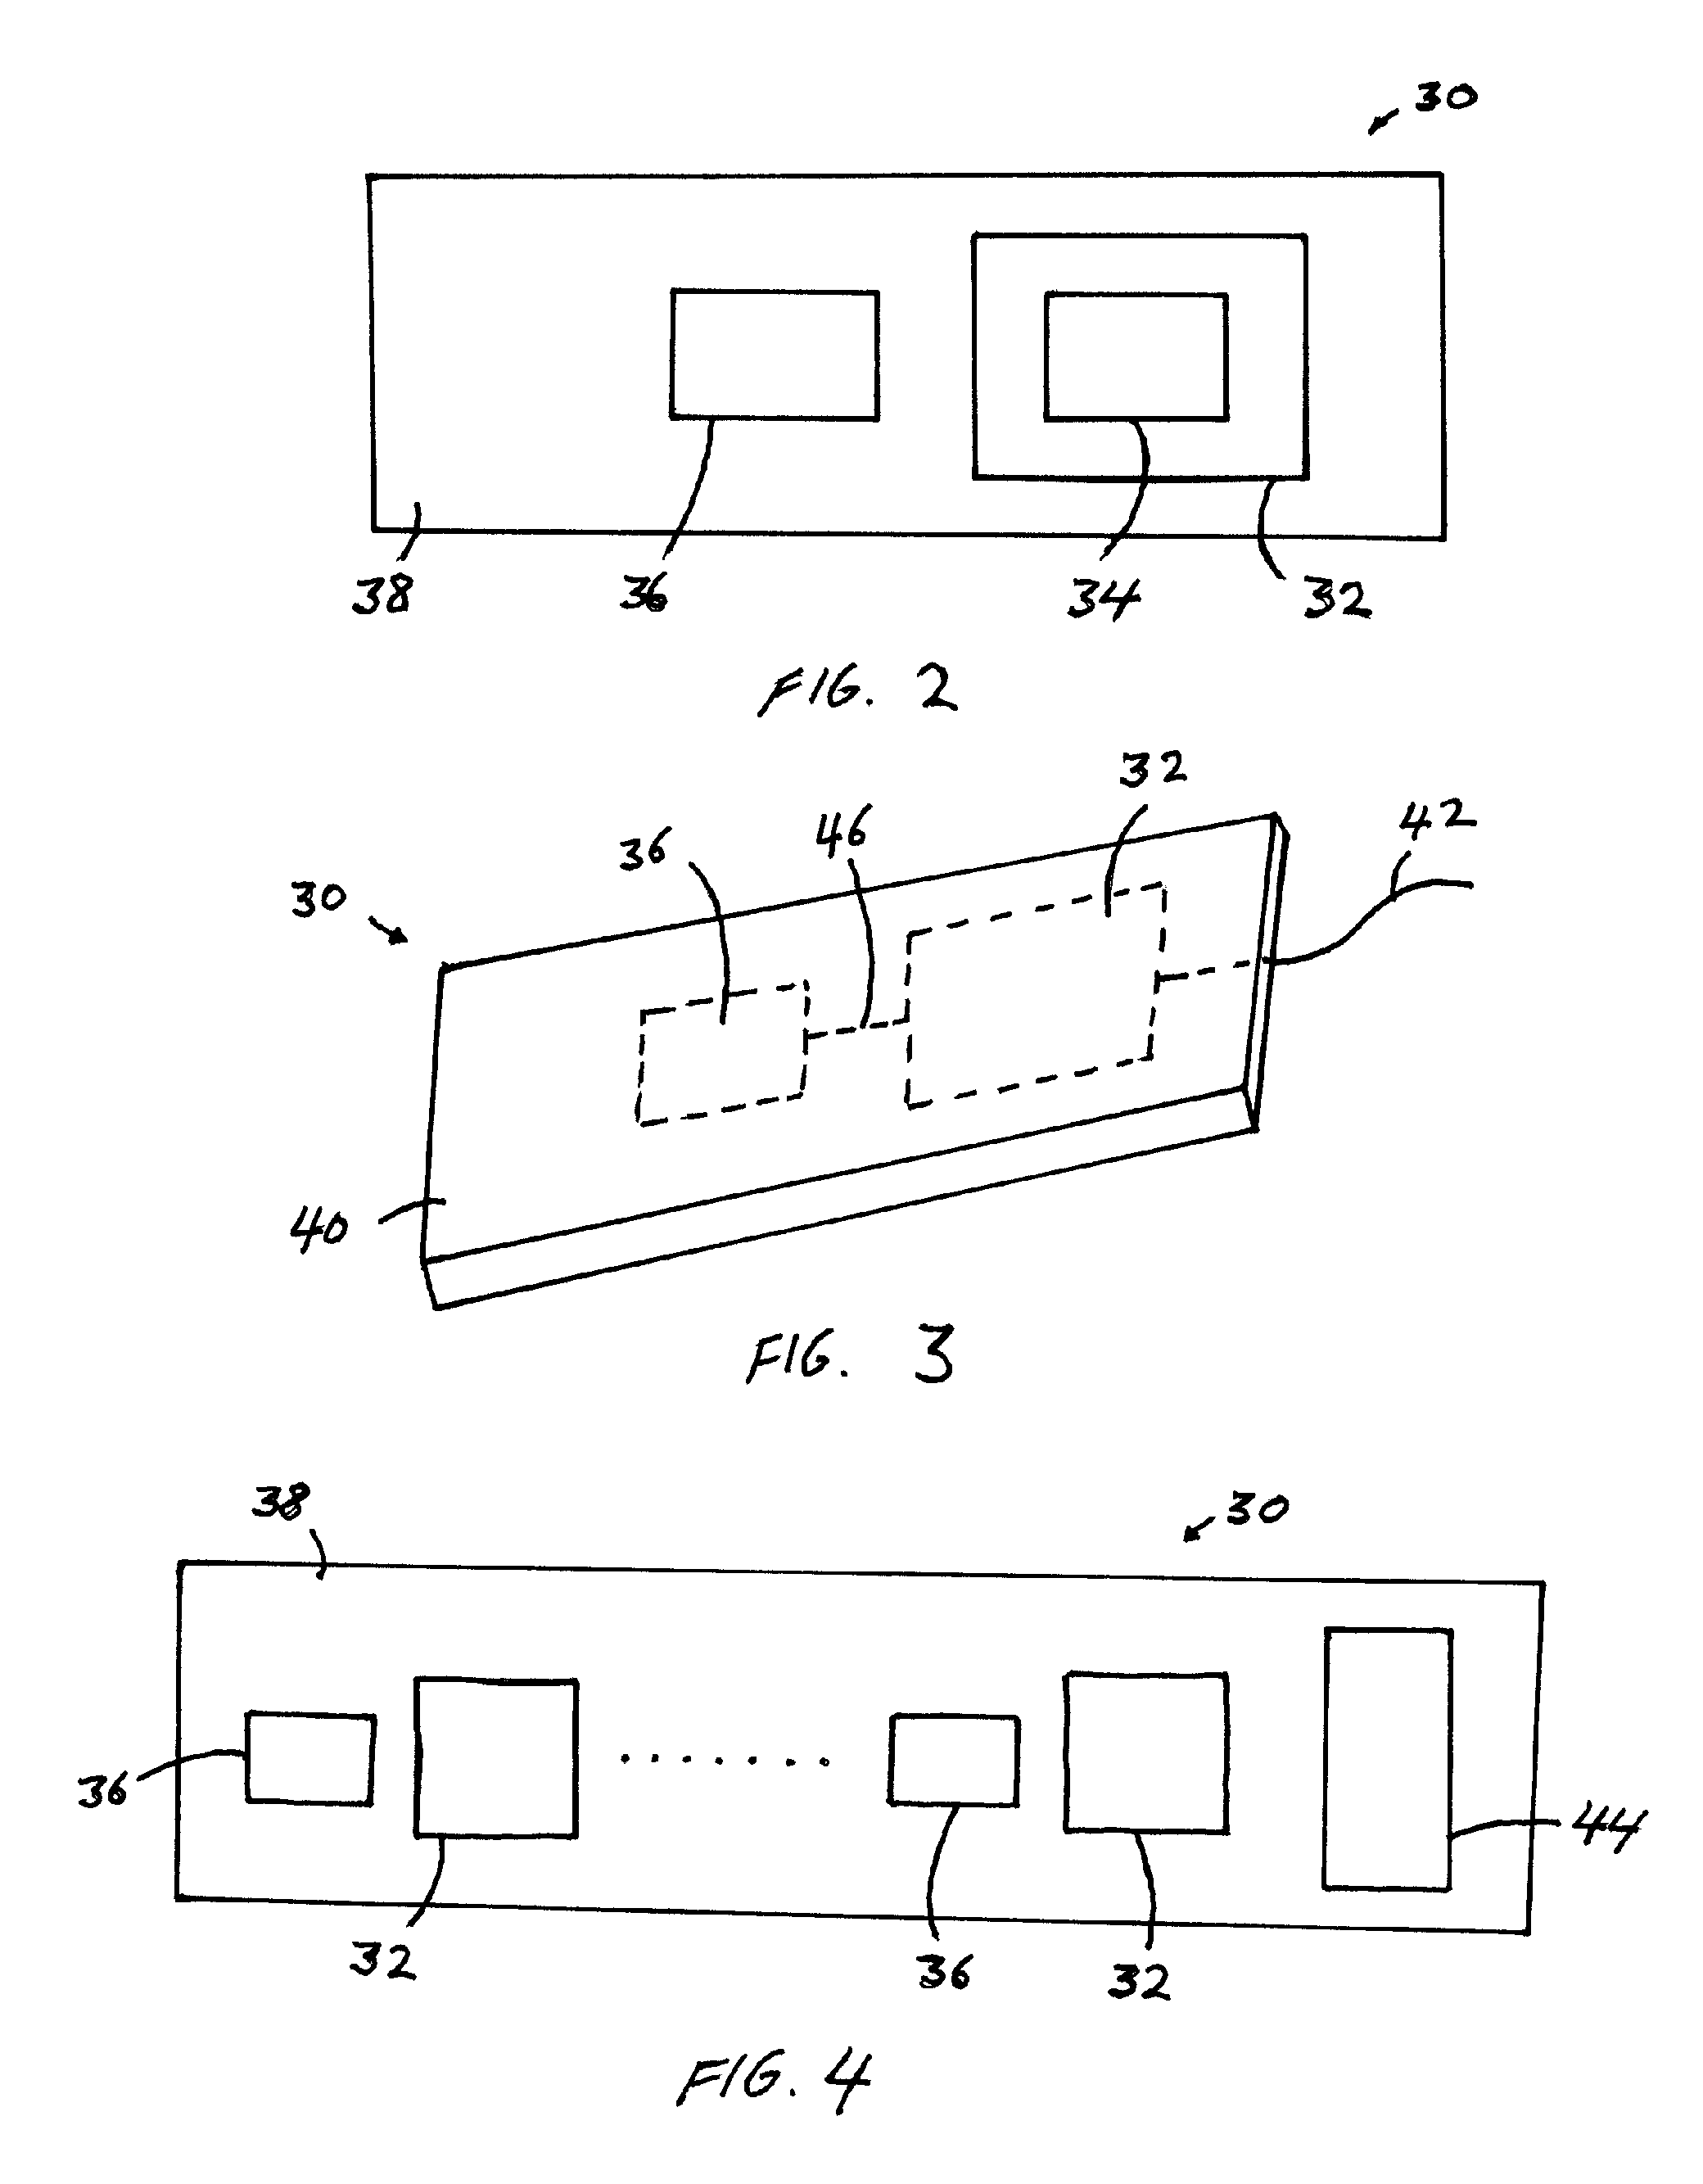 Integrated acoustic transducer assembly